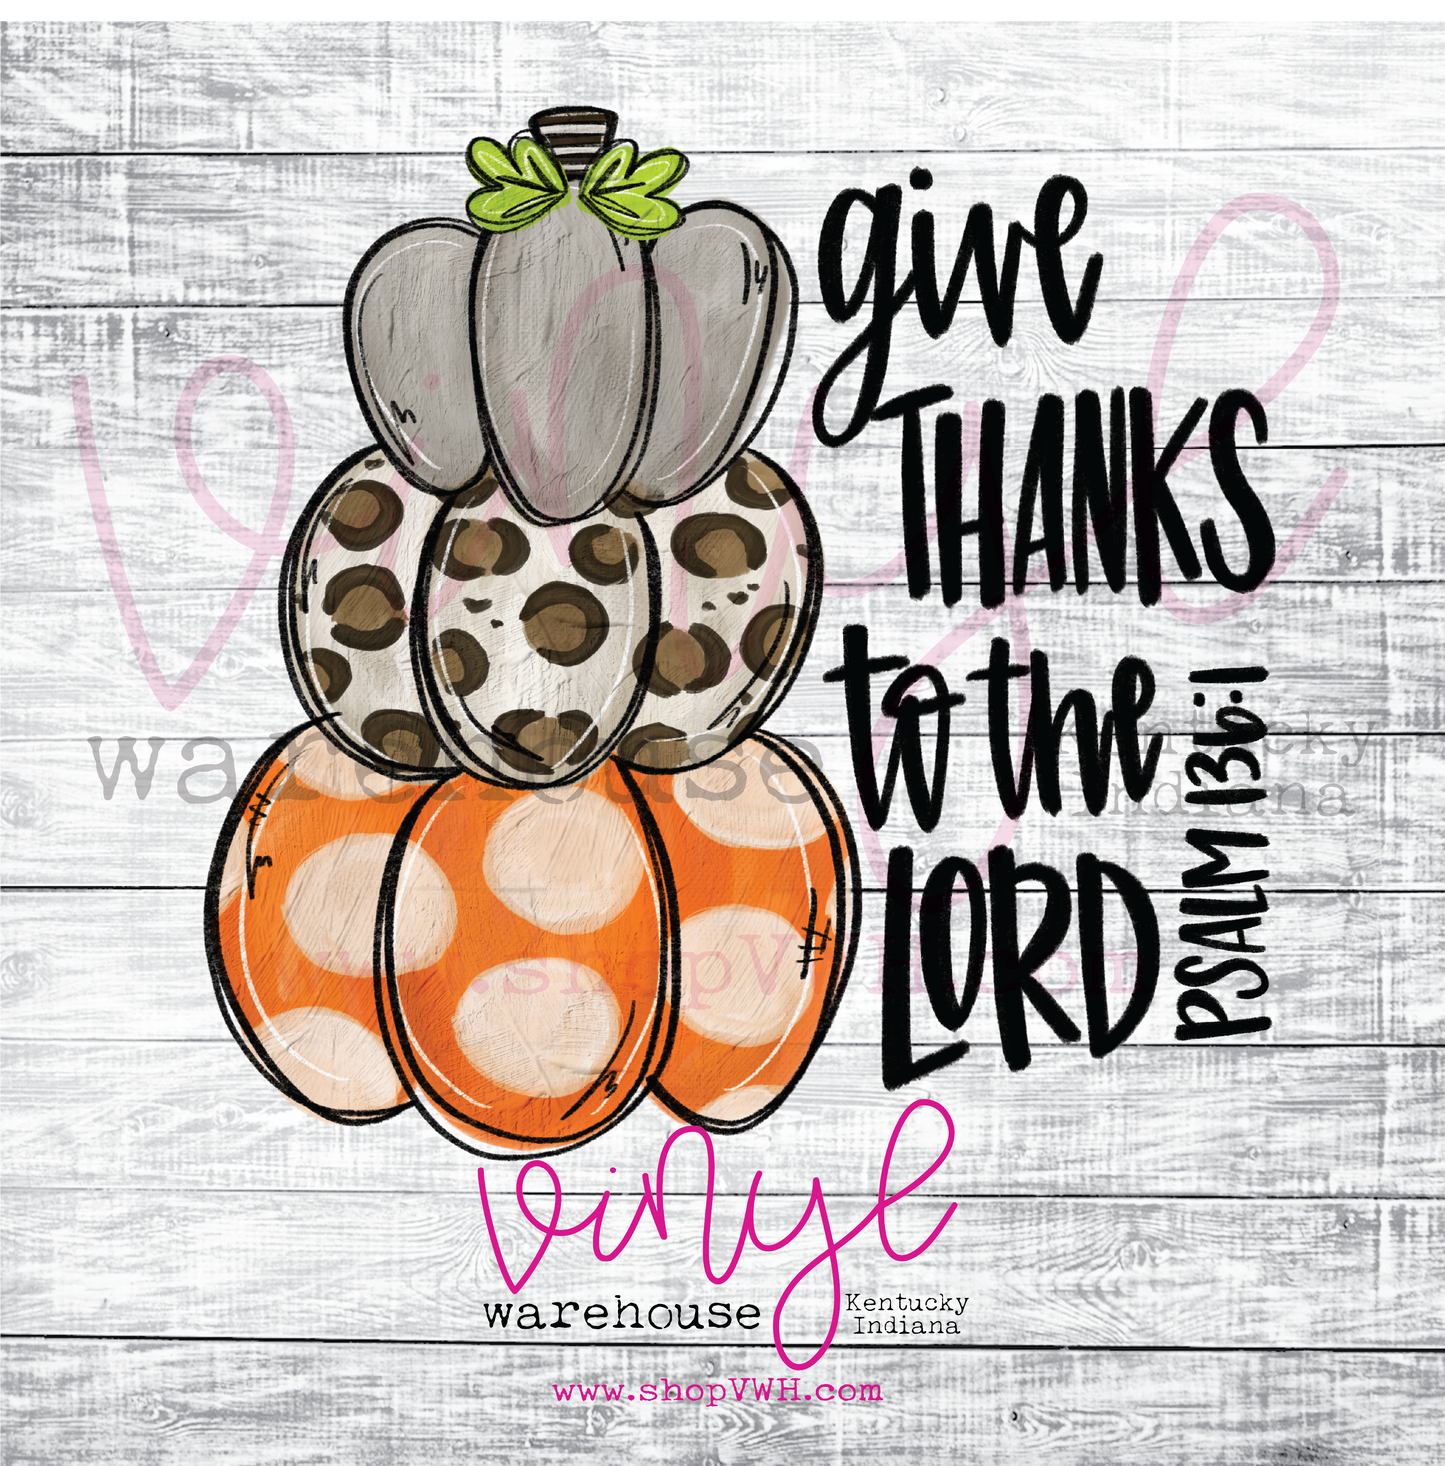 Give Thanks To The Lord (Leopard Pumpkin) - Heat Transfer Print